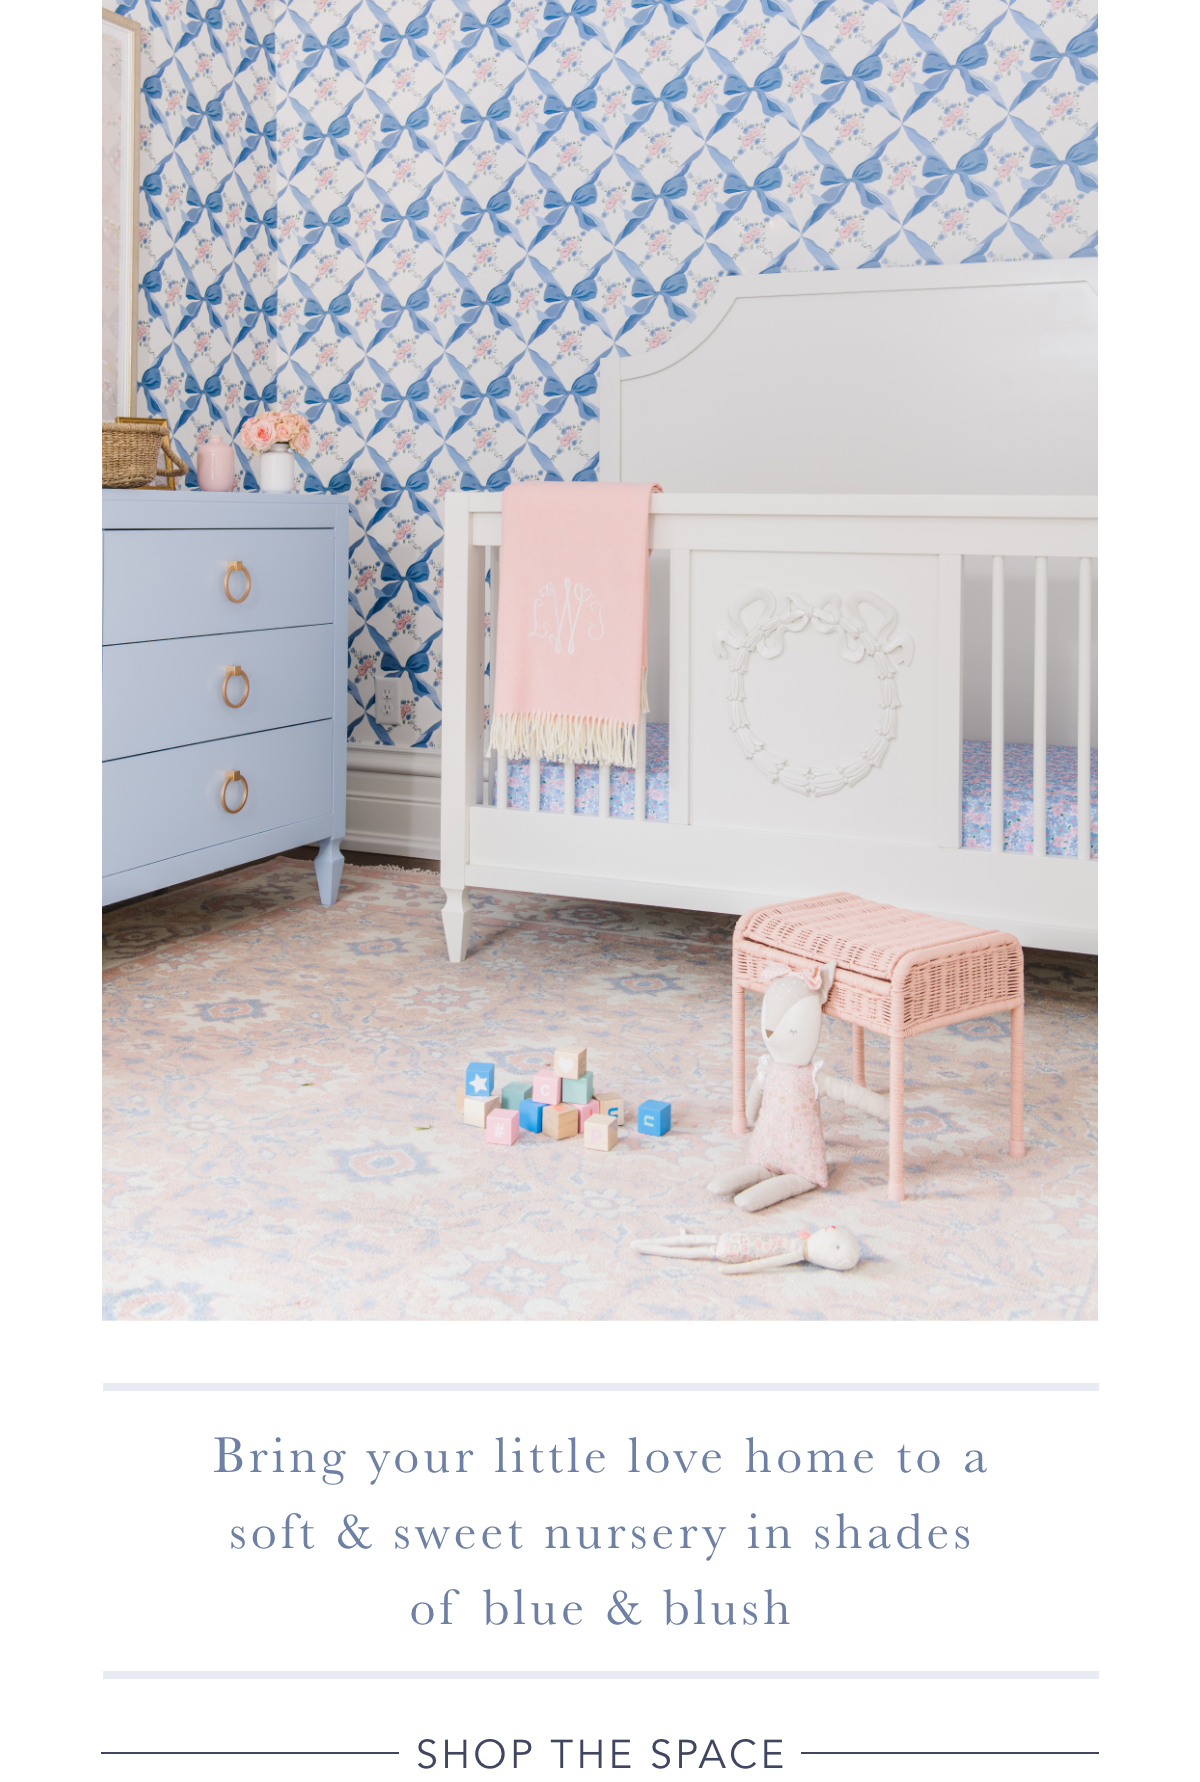 Bring your little love home to a soft & sweet nursery in shades of blue & blush